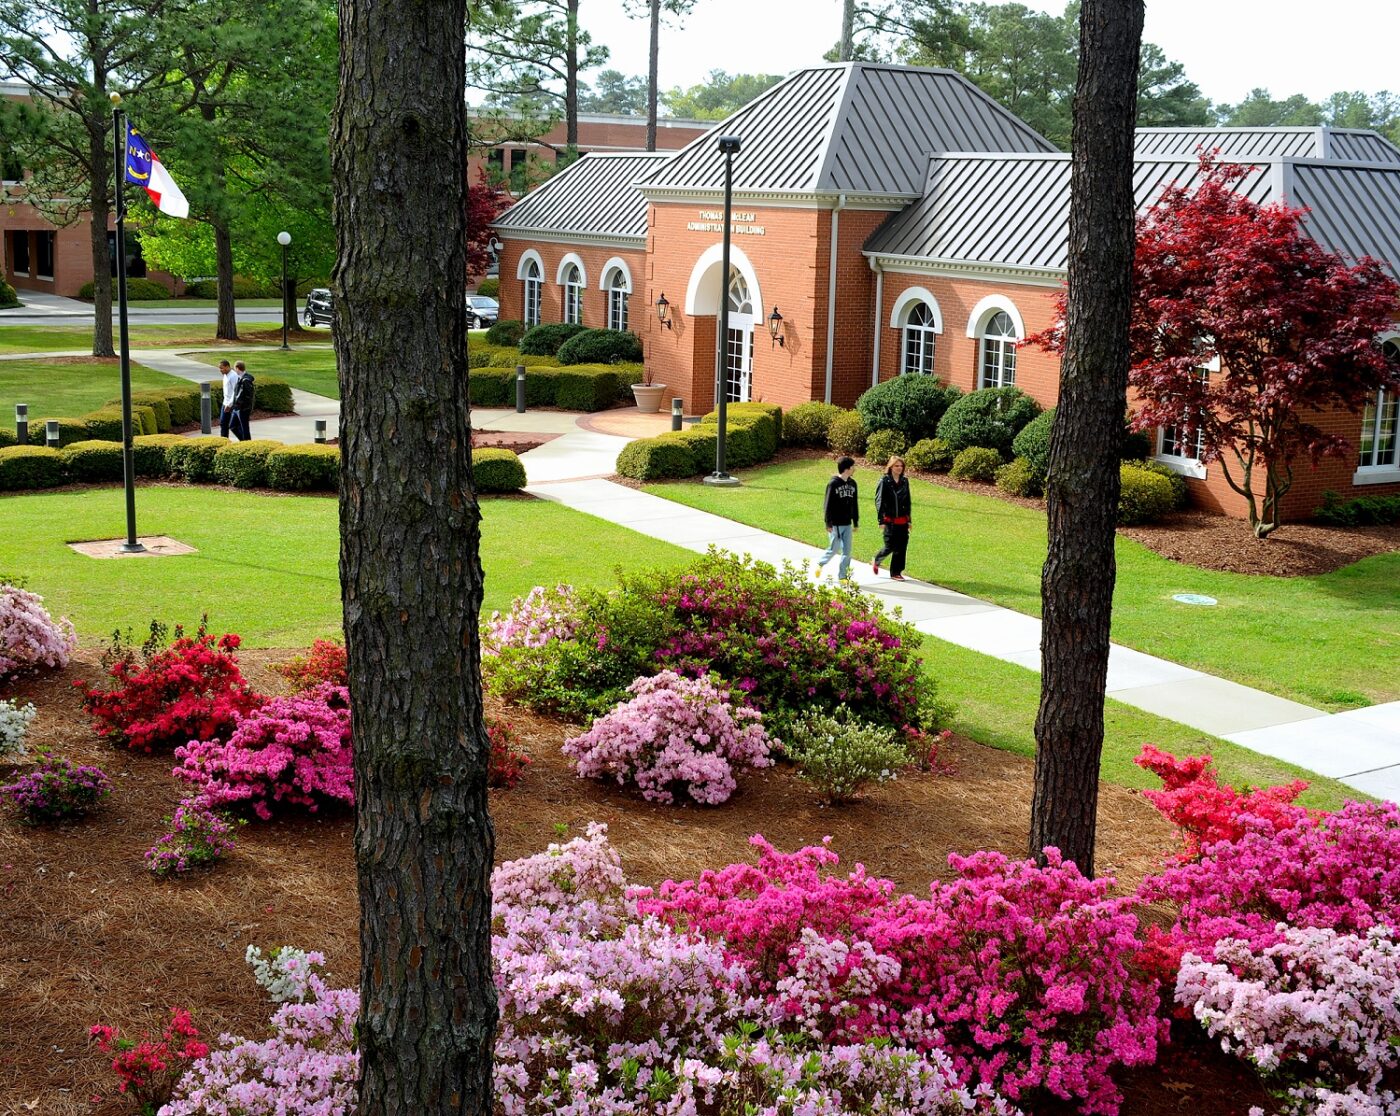 Wide photo showing azaleas and pine tree trunks in the foreground and the administration building in the background